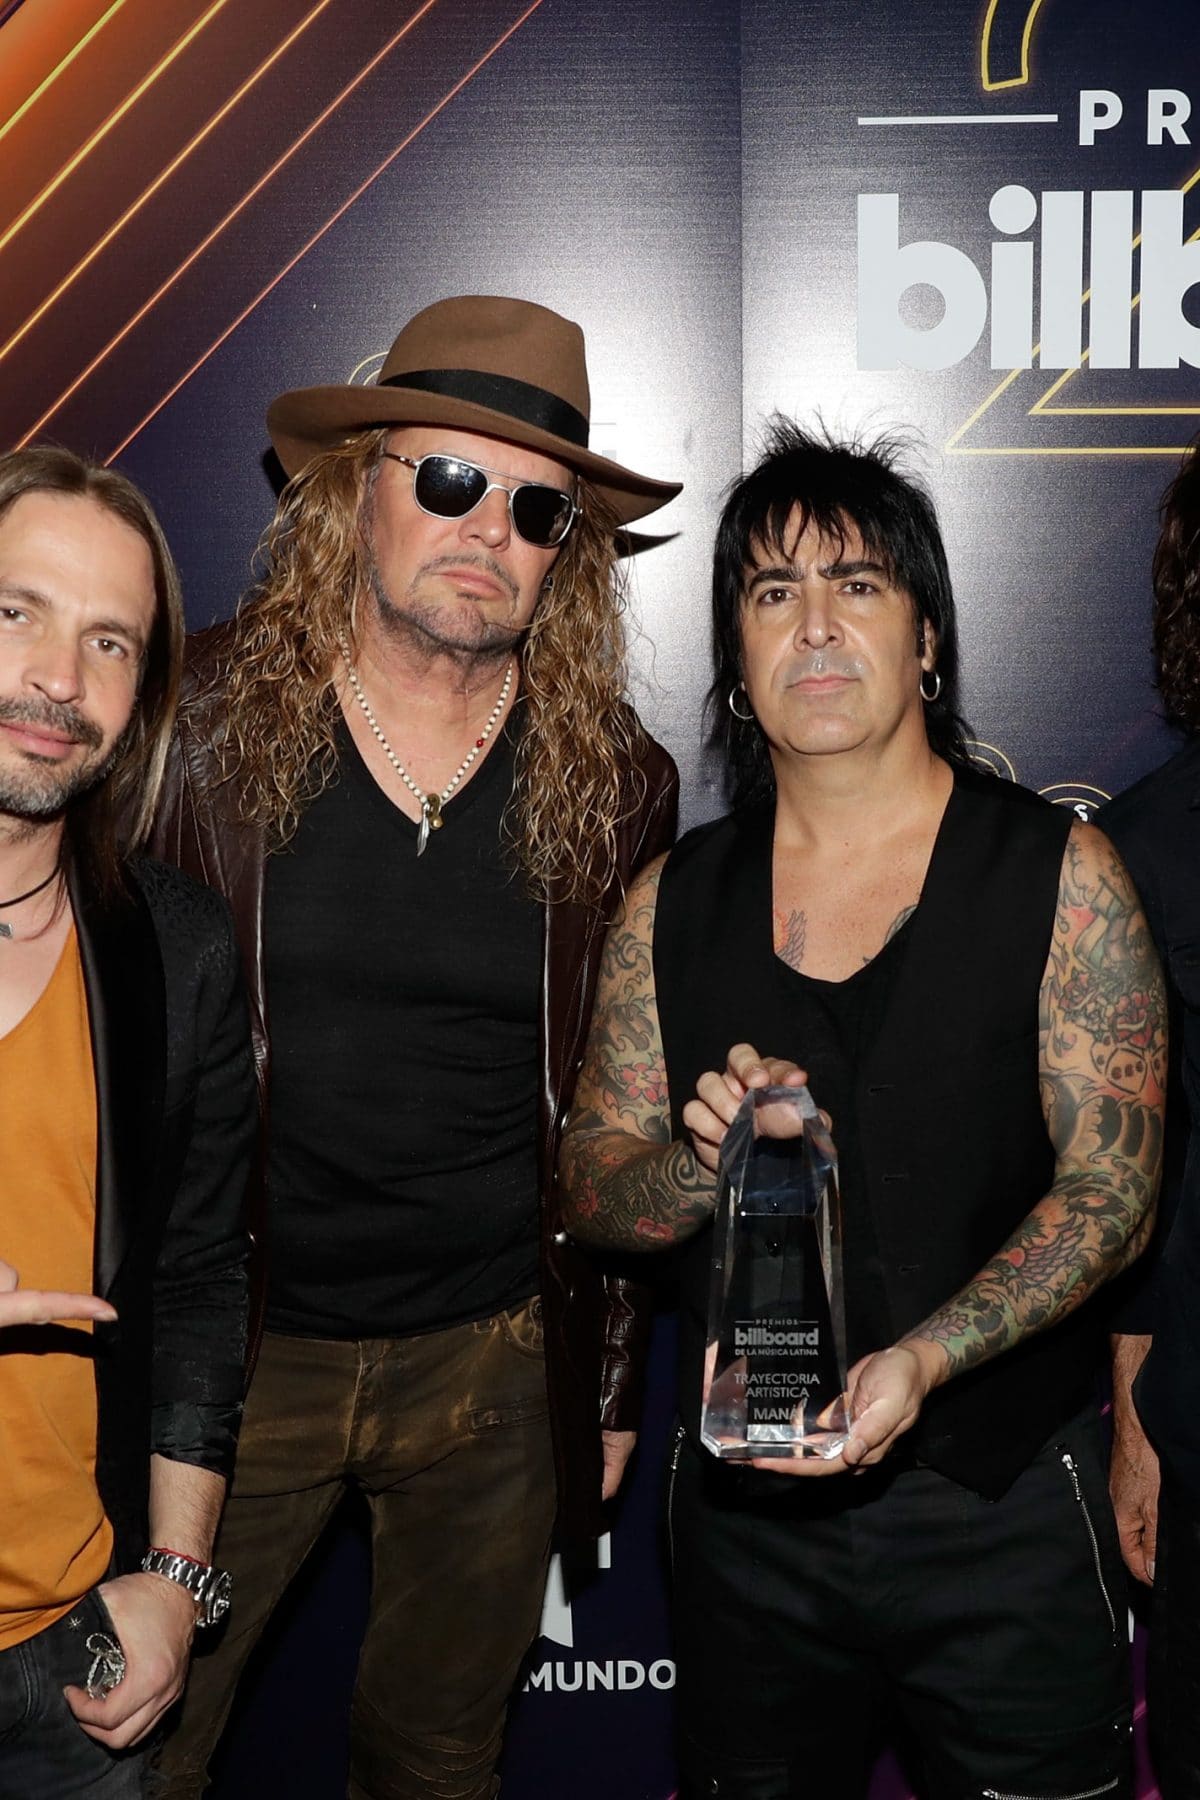 Mana poses with an award in the press room at the 2018 Billboard Latin Music Awards at the Mandalay Bay Events Center on April 26, 2018.